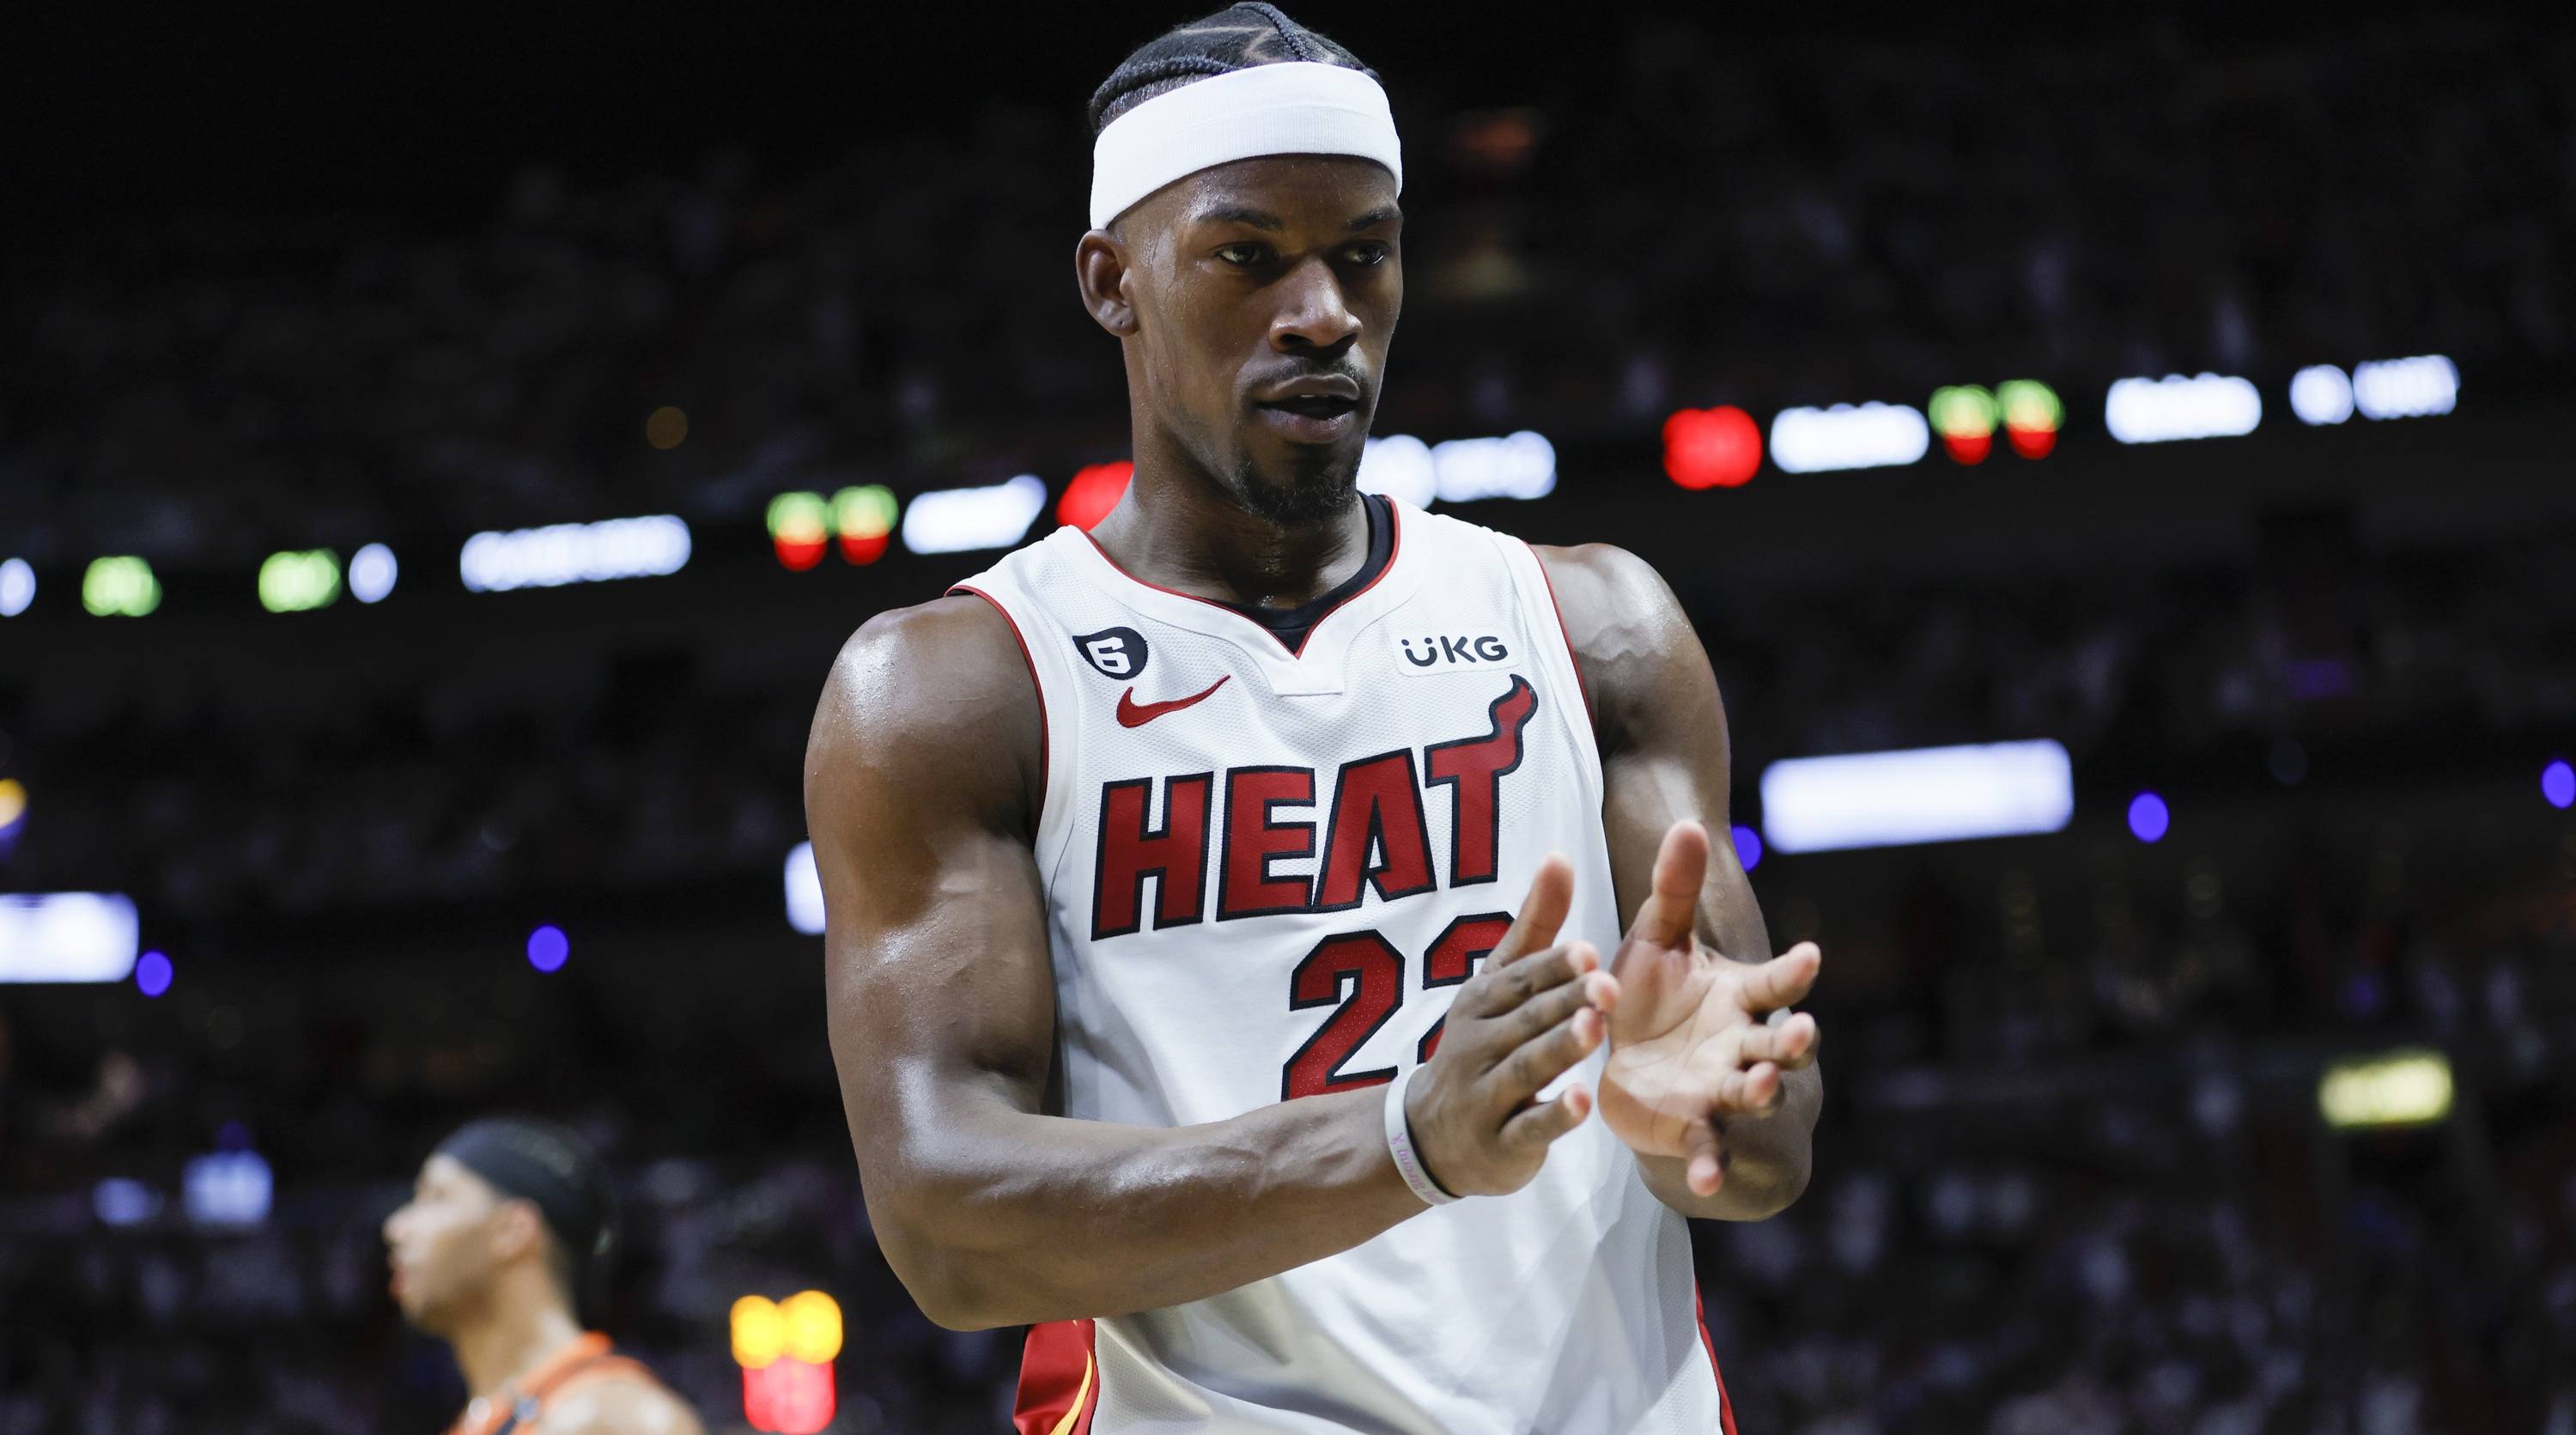 Heat forward Jimmy Butler claps in the middle of plays during a game vs. the Knicks.